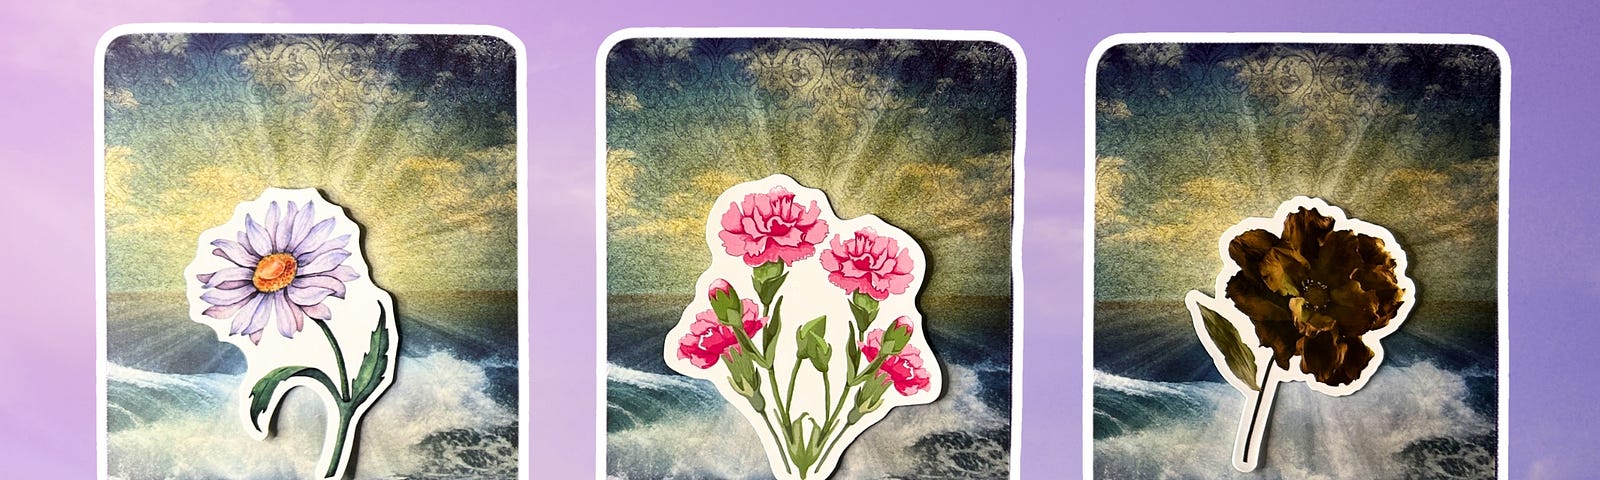 Three oracle pick a card piles: piles 1 — white flower, pile 2 — pink flowers, and pile 3 — brown flower